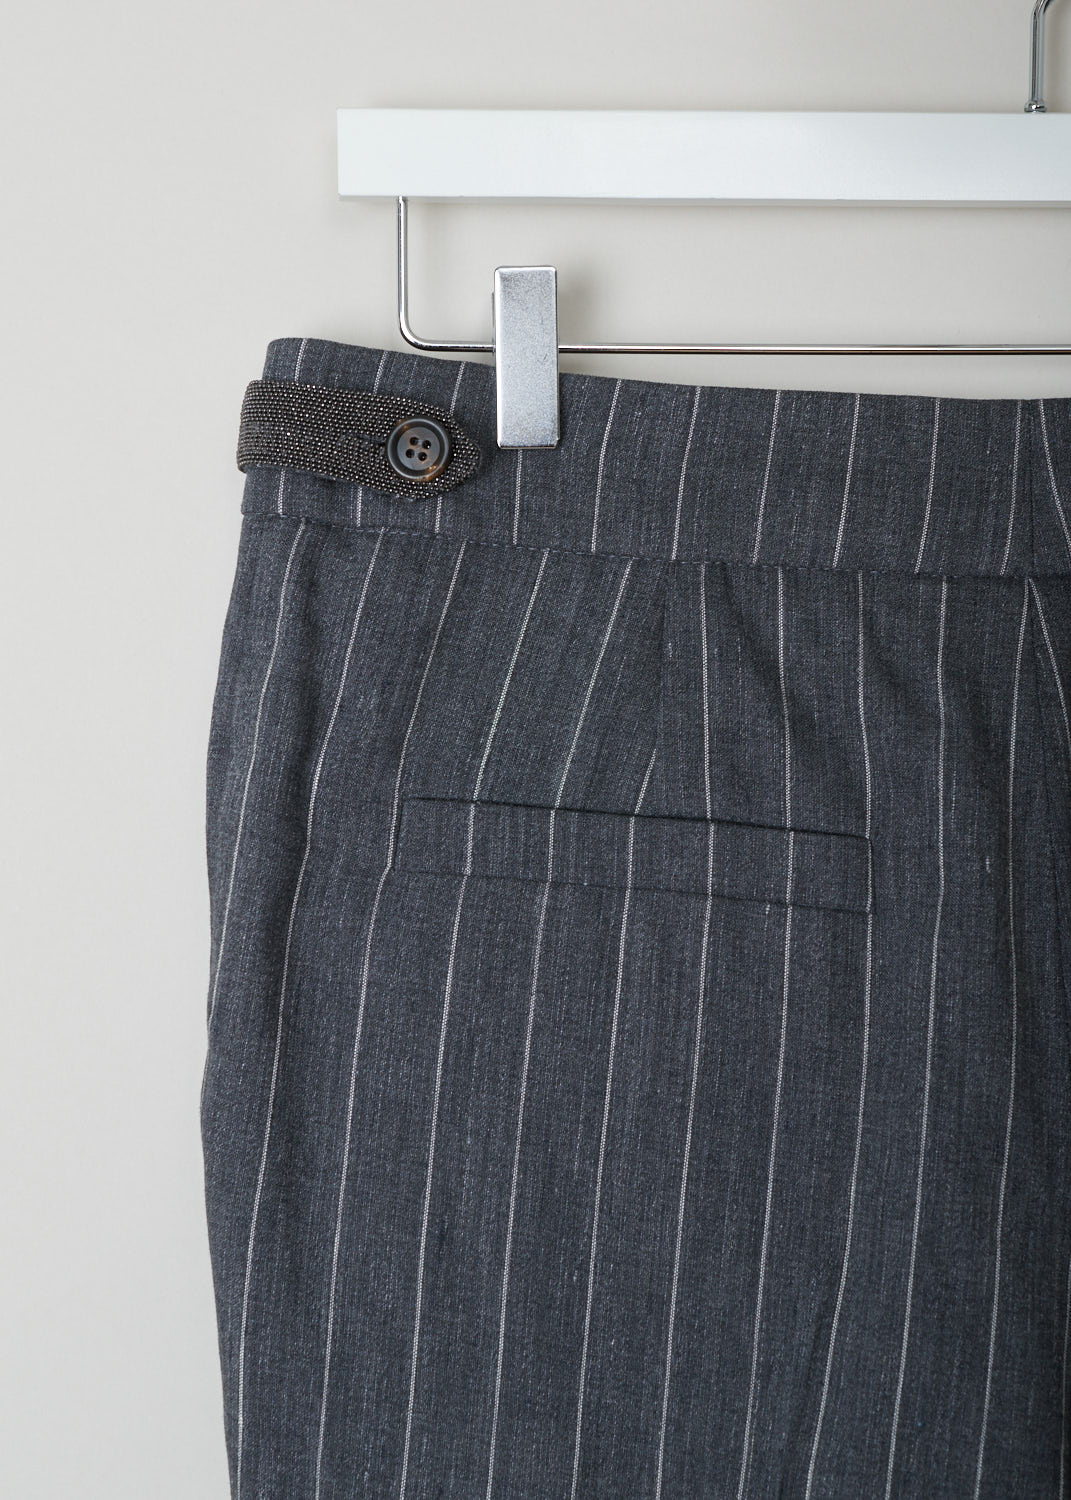 Brunello Cucinelli, mid grey pinstripe pants, MF554P6492_C002, grey white, detail, Mid grey pants, made of a pinstripe fabric. A notable feature of this model are the side tabs, that are used instead of belt loops. Furthermore, this model has a wide fit and a cropped length. The attachment options on this model are metal clips, a zipper and a French bearer button.